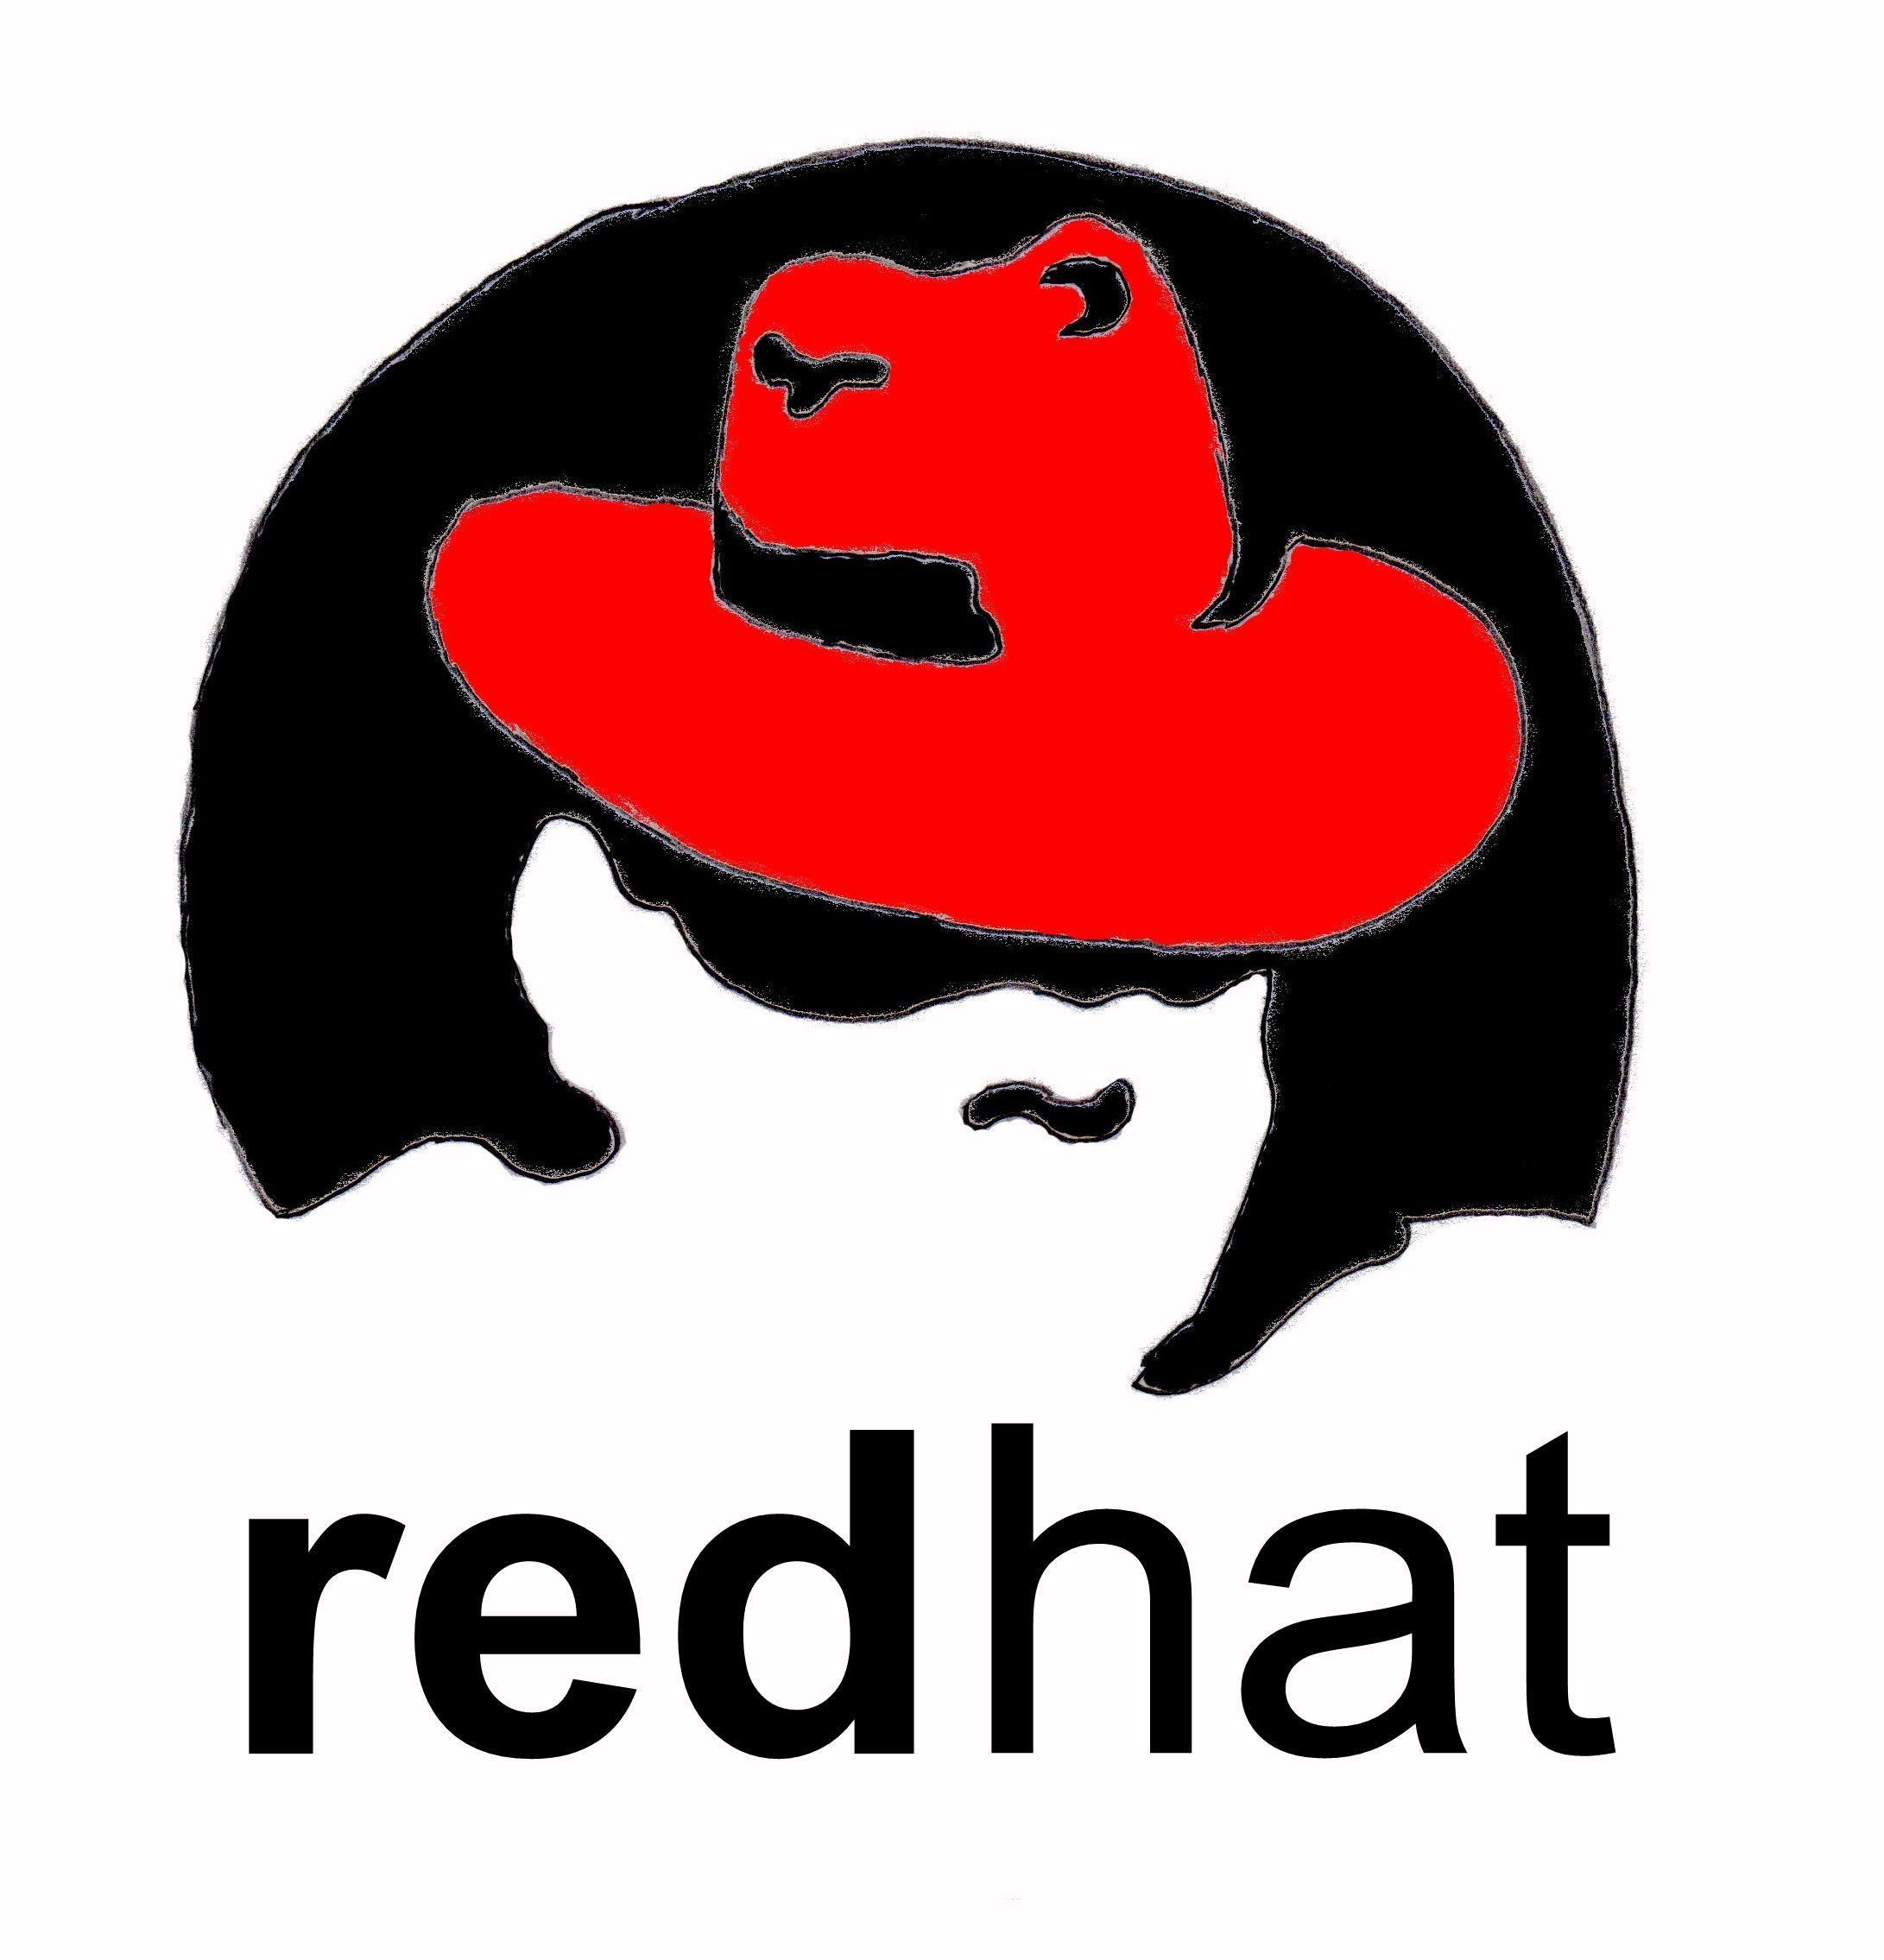 Red Linux Logo - Linux red hat Logos